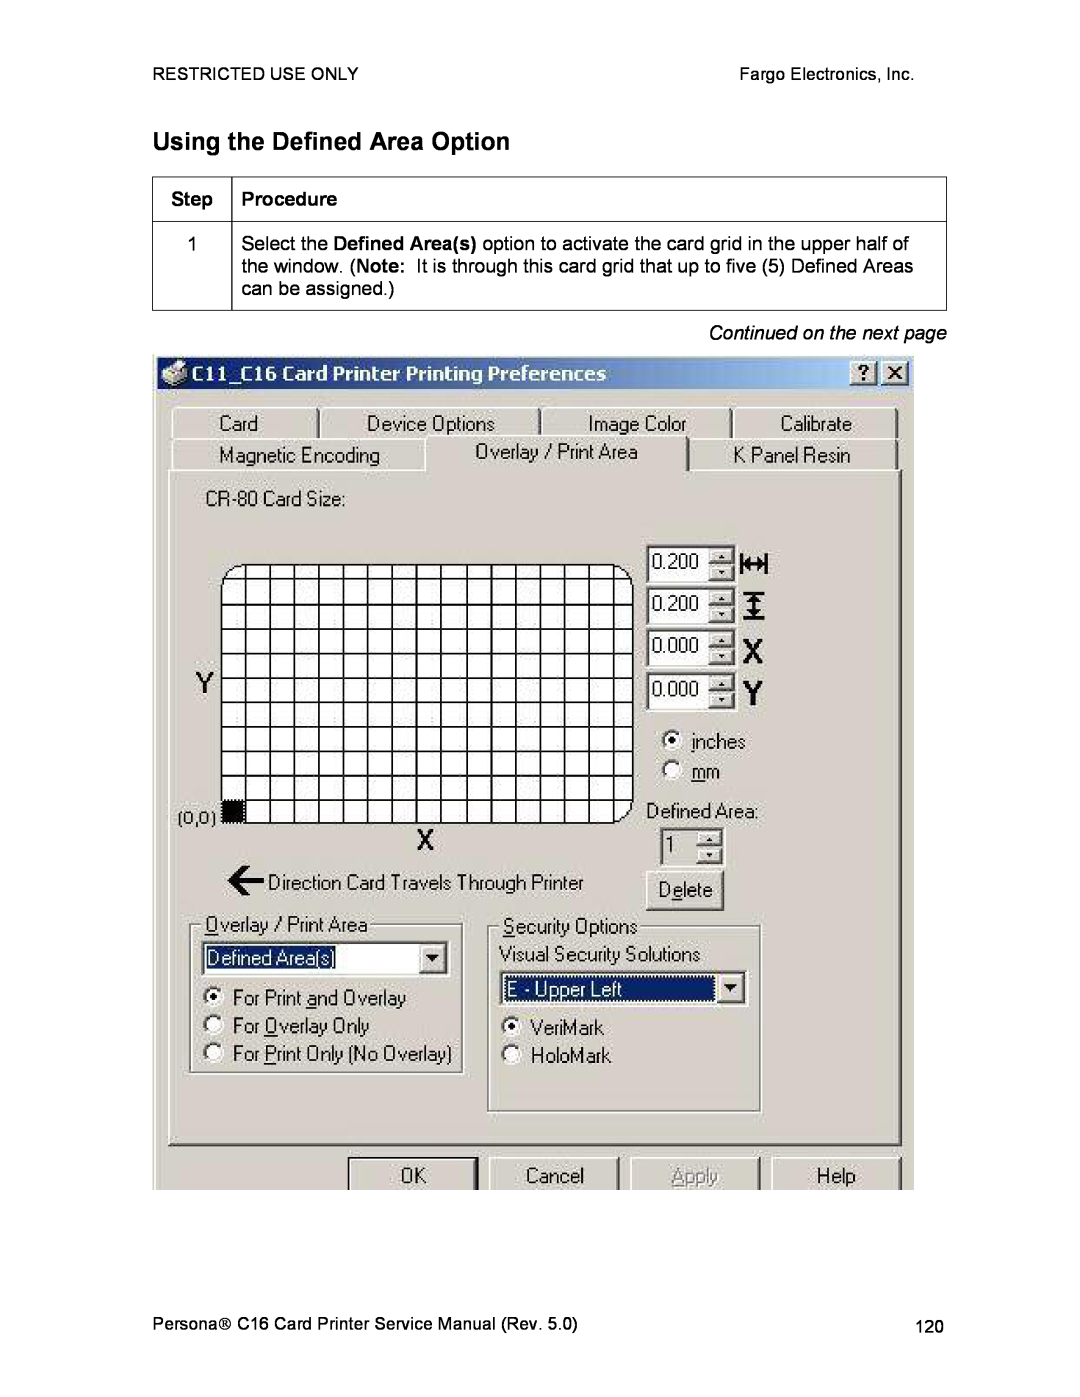 FARGO electronic C16 service manual Using the Defined Area Option, Continued on the next page 